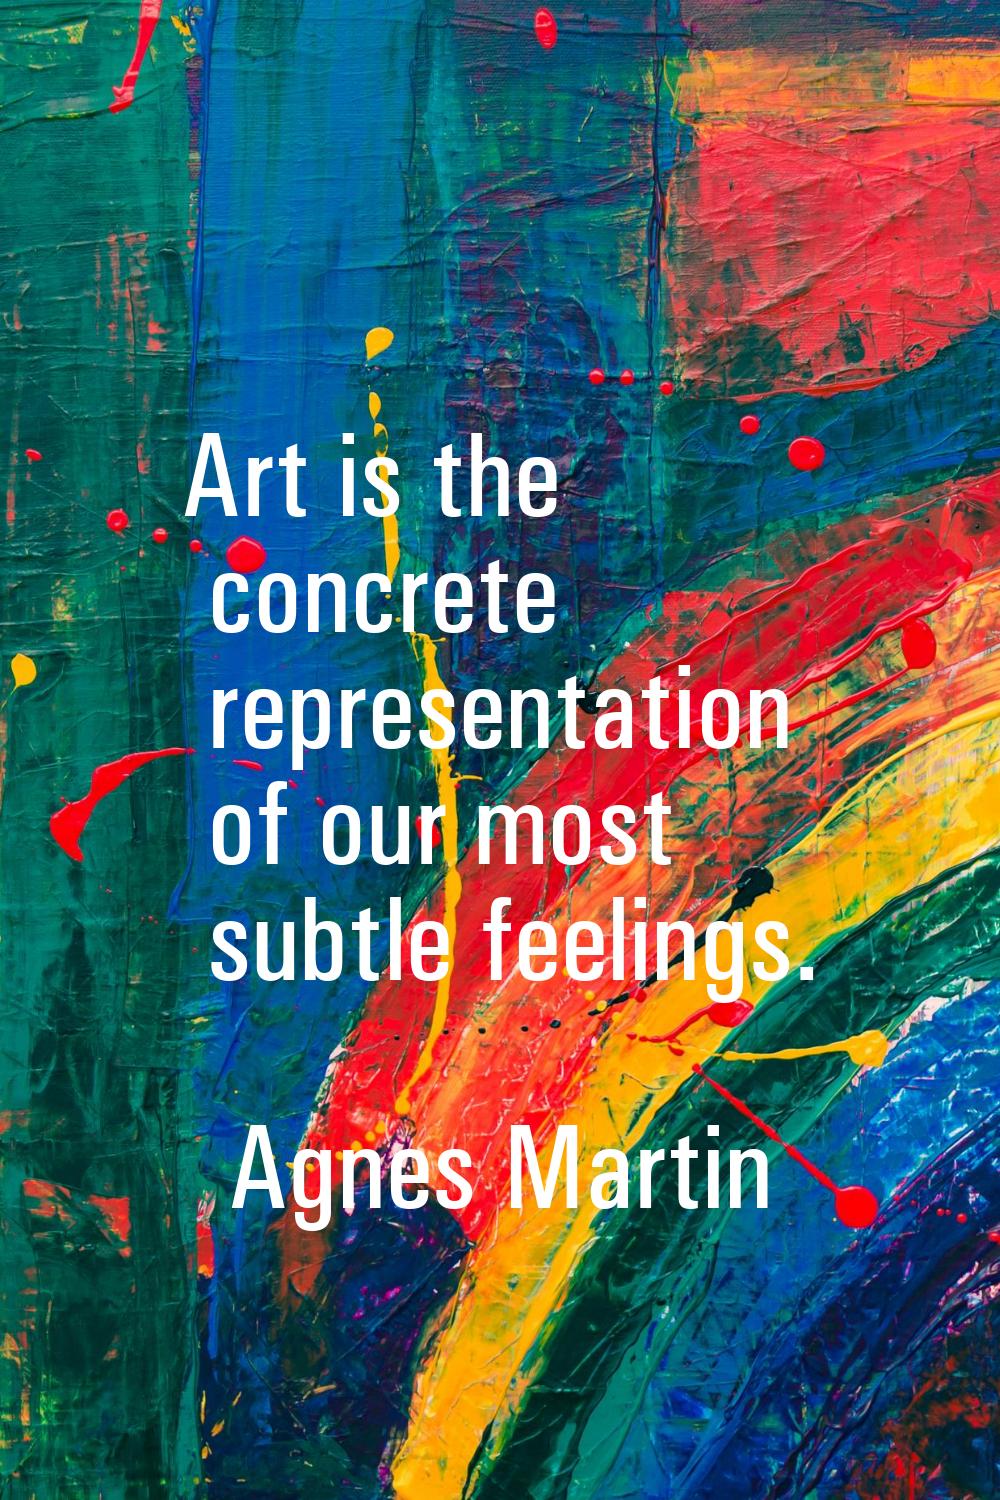 Art is the concrete representation of our most subtle feelings.